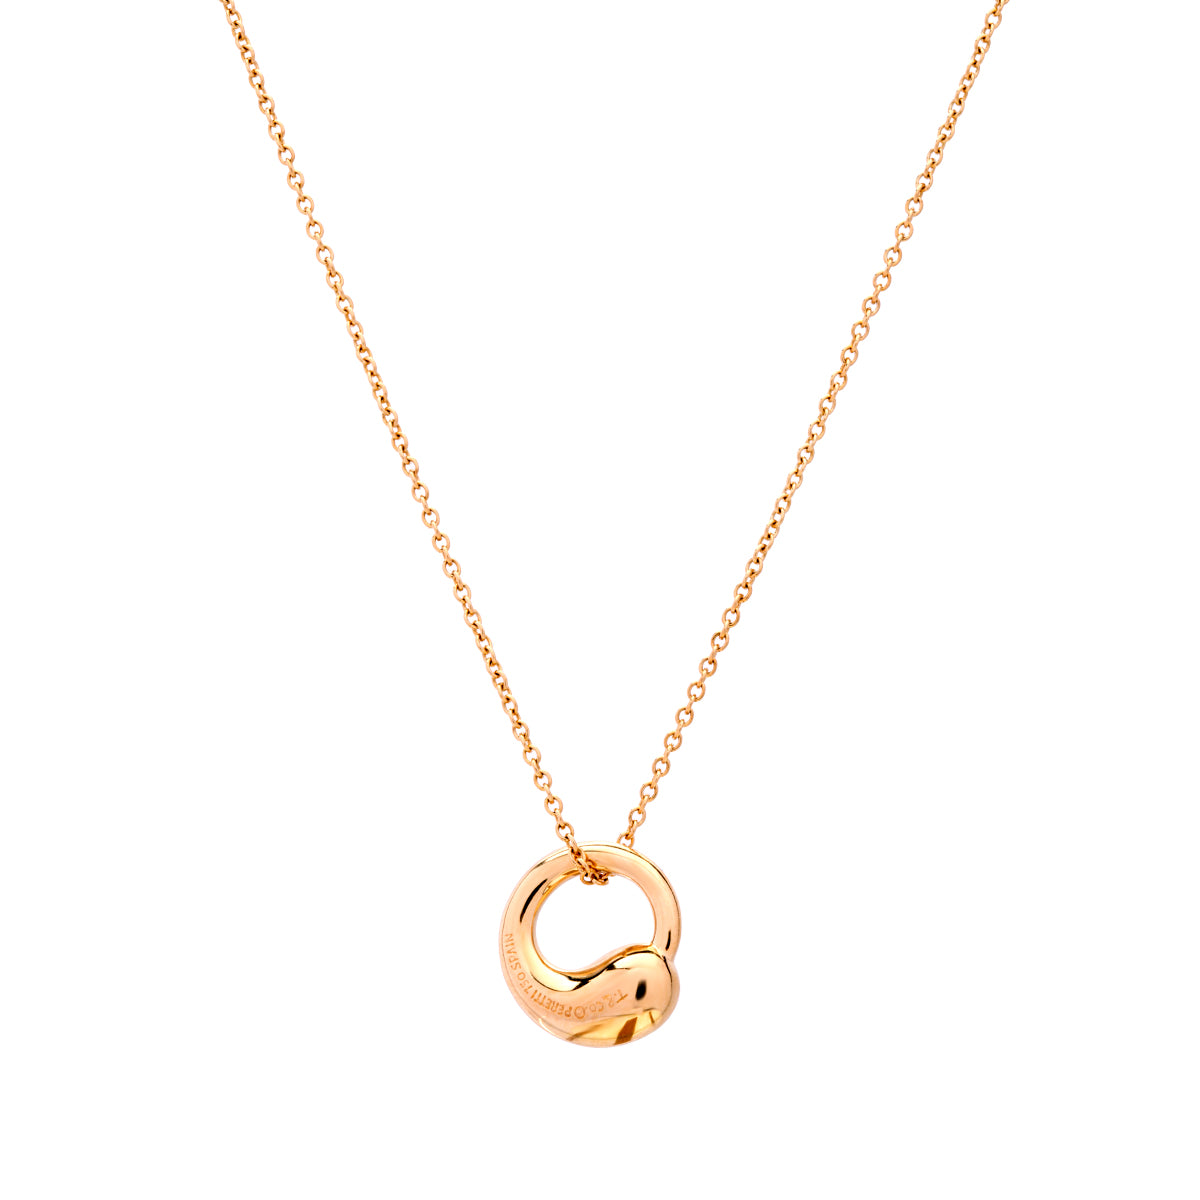 Engraved Family Circle Necklace for Mom in Rose Gold Plating - MYKA